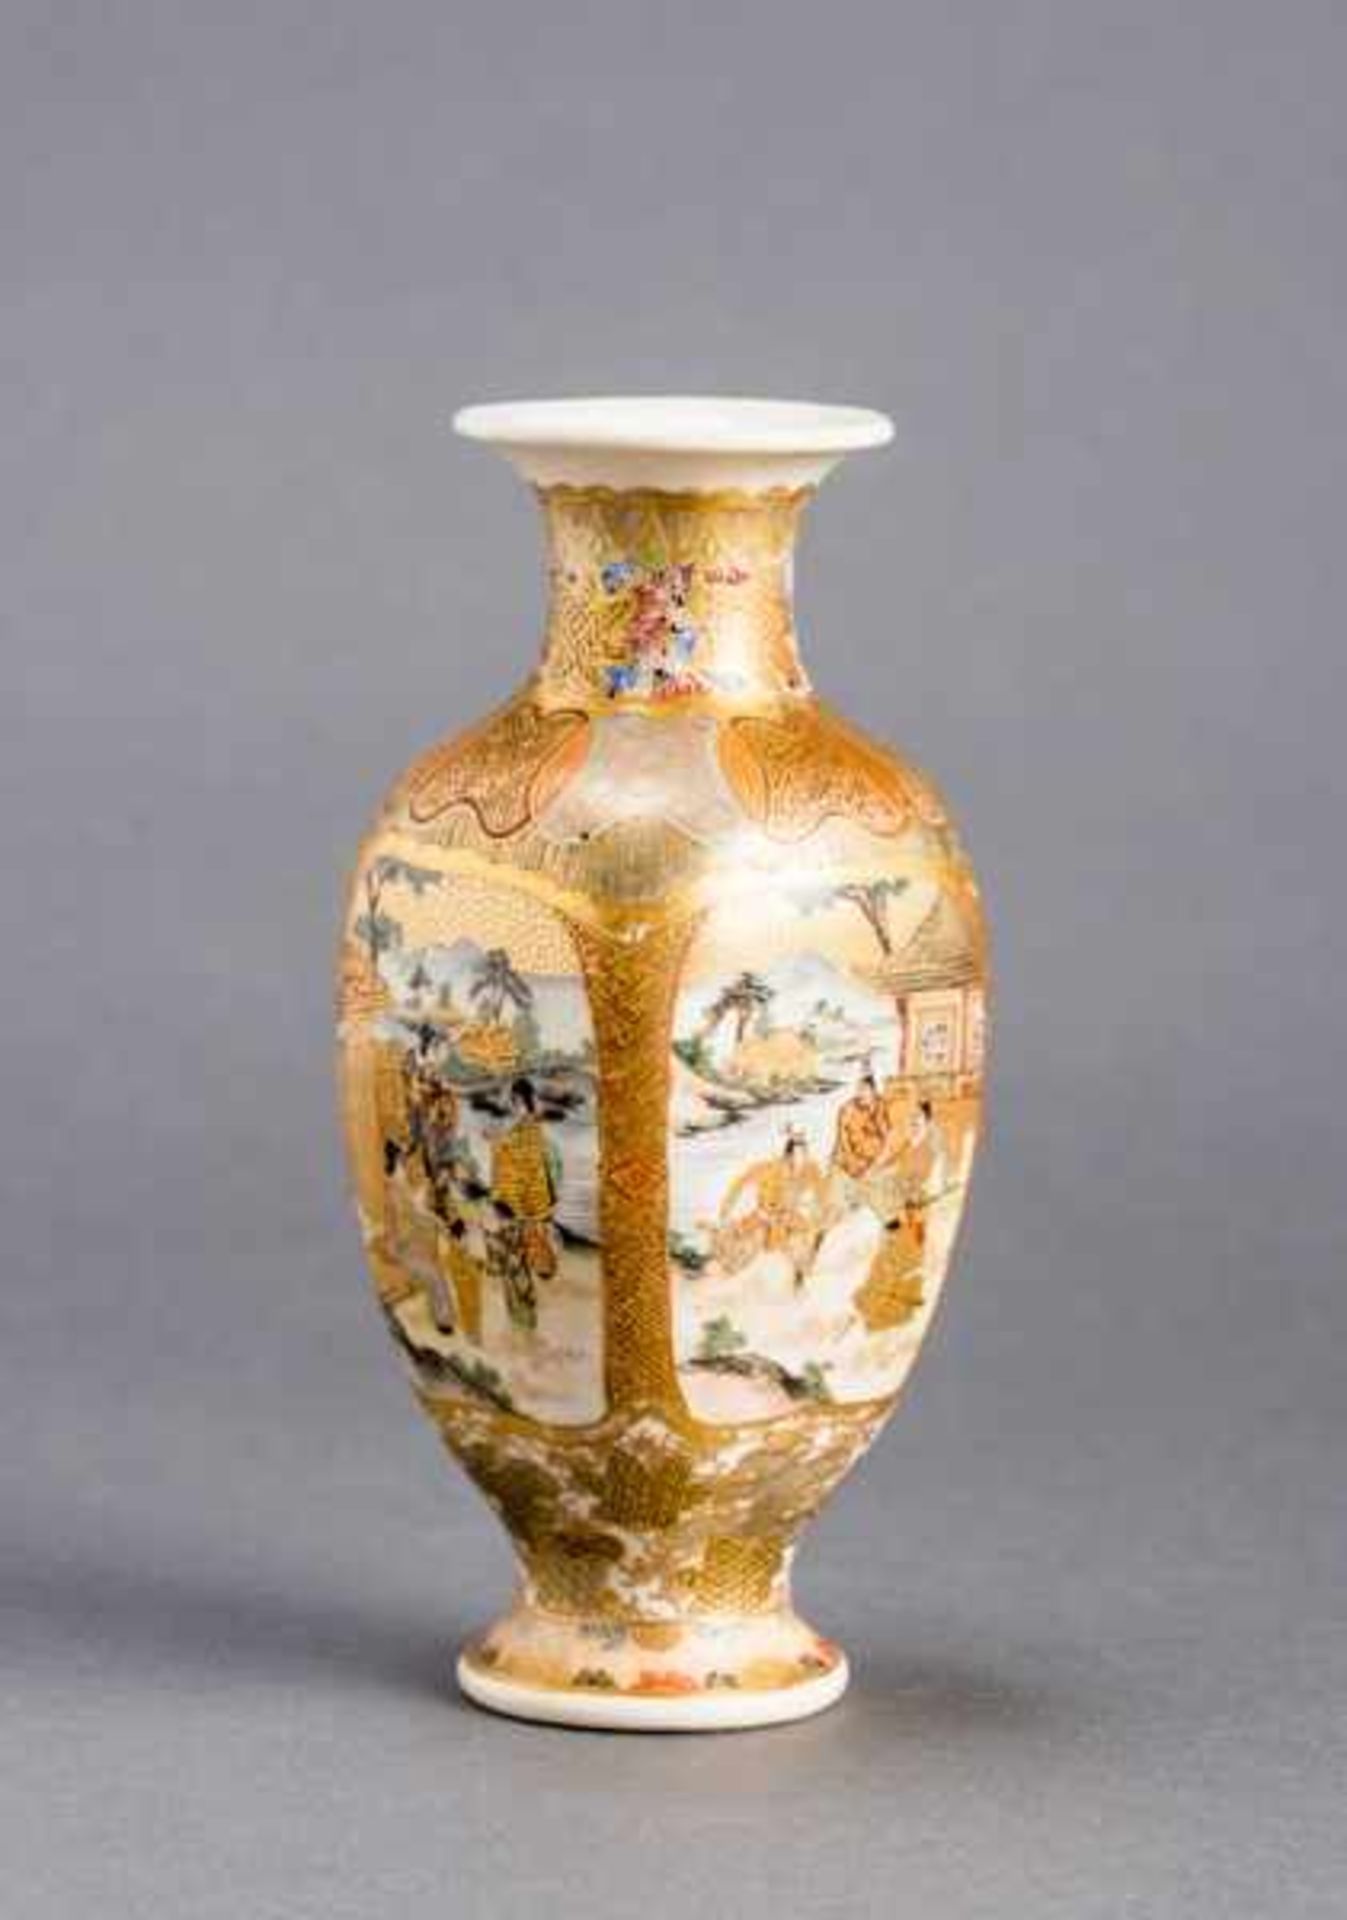 FUKUBE: A SMALL SATSUMA VASE Glazed ceramic with paint and gold. Japan, Meiji periodSmall, four- - Image 2 of 6